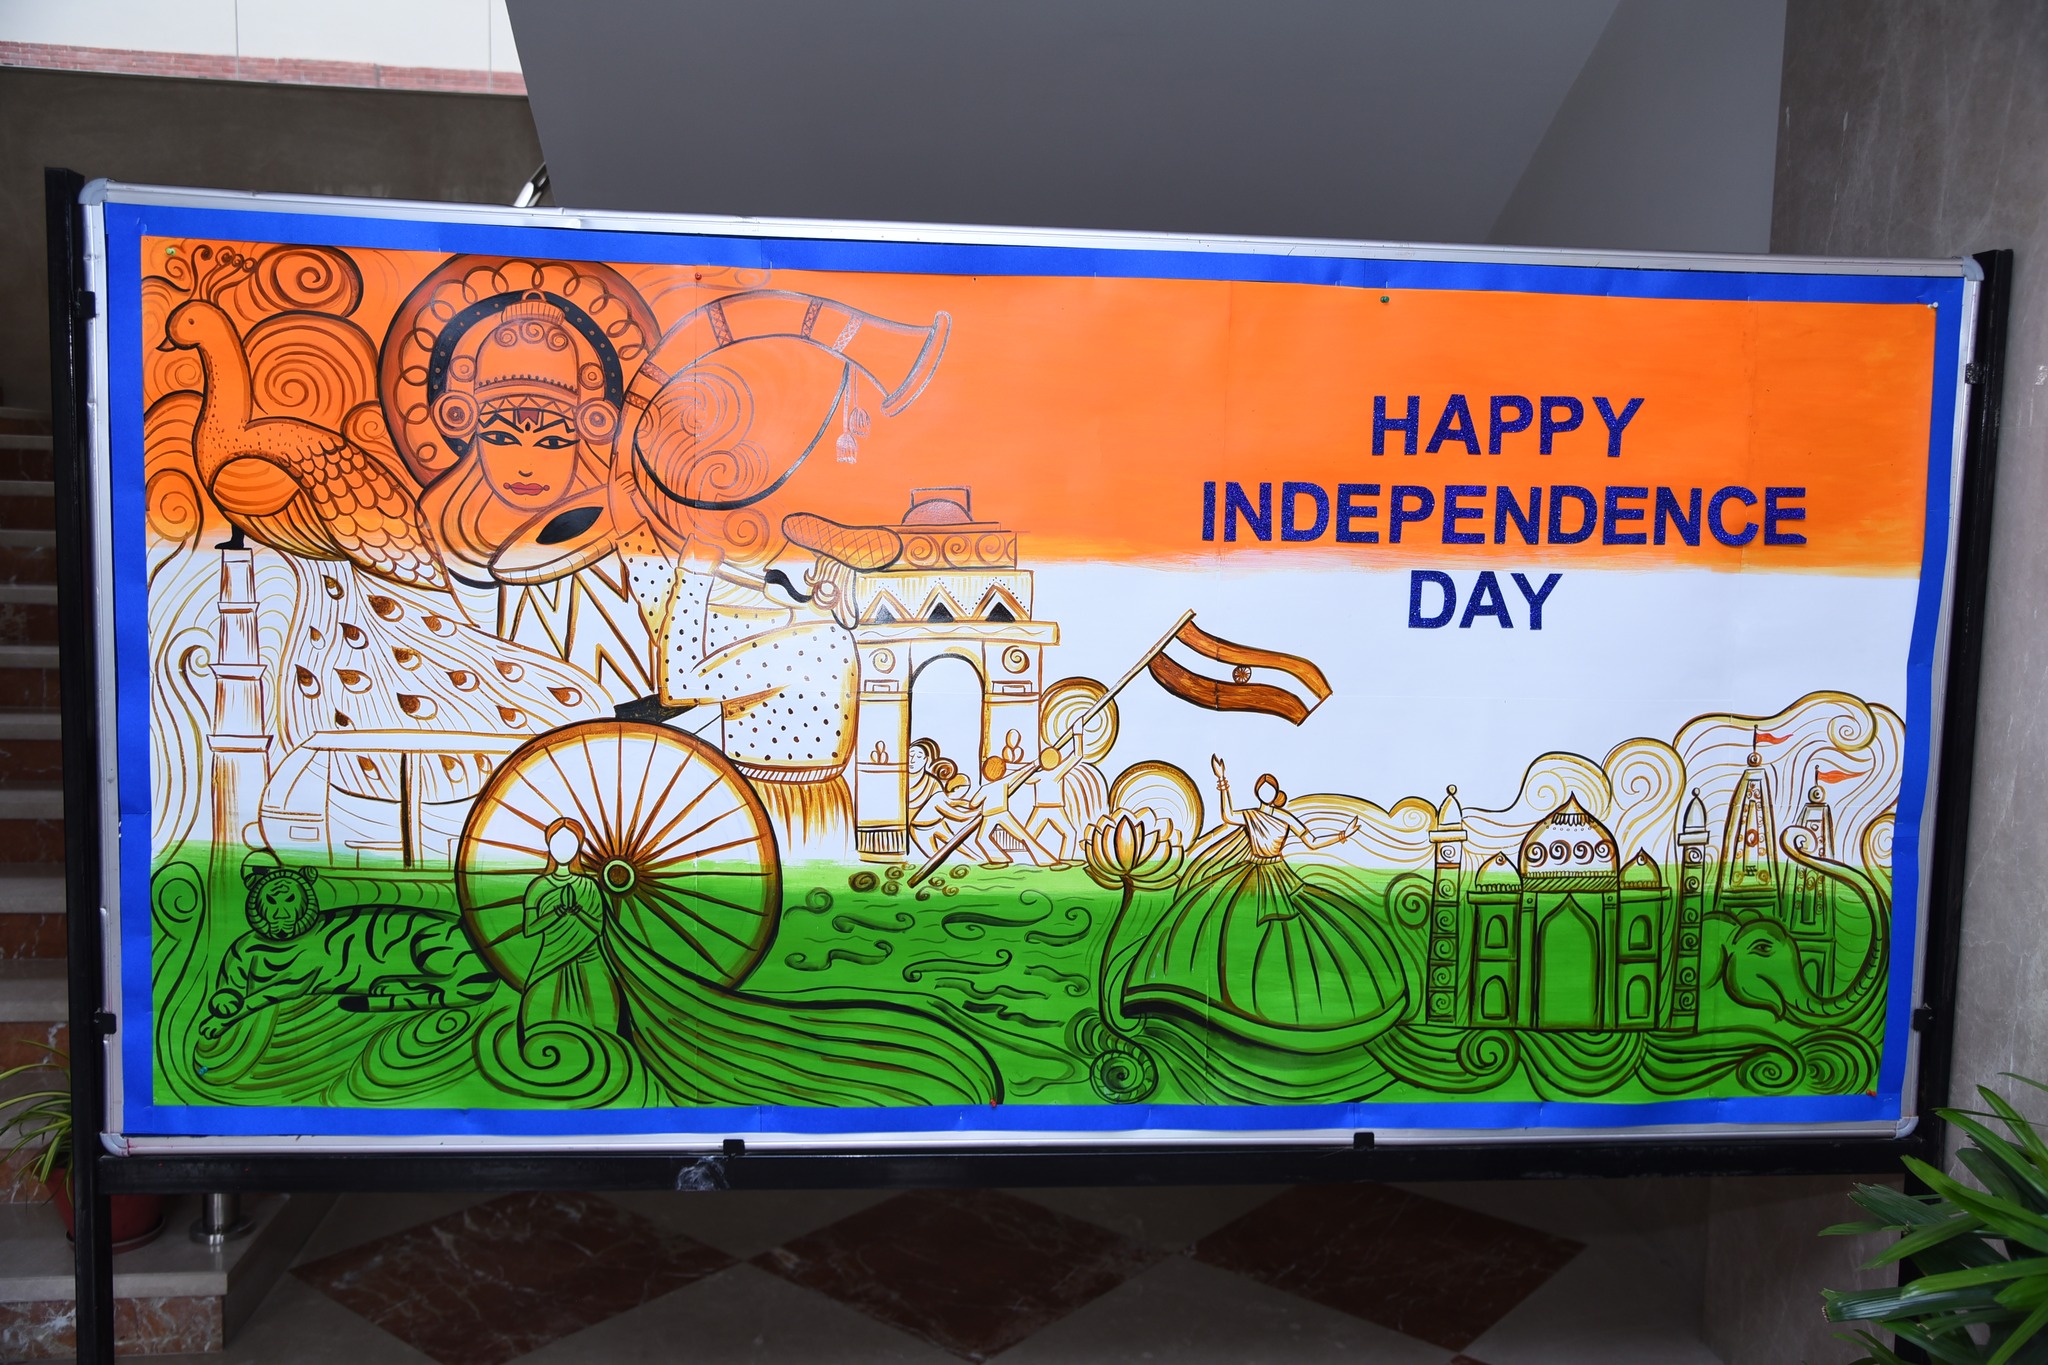 76 years of India’s Independence